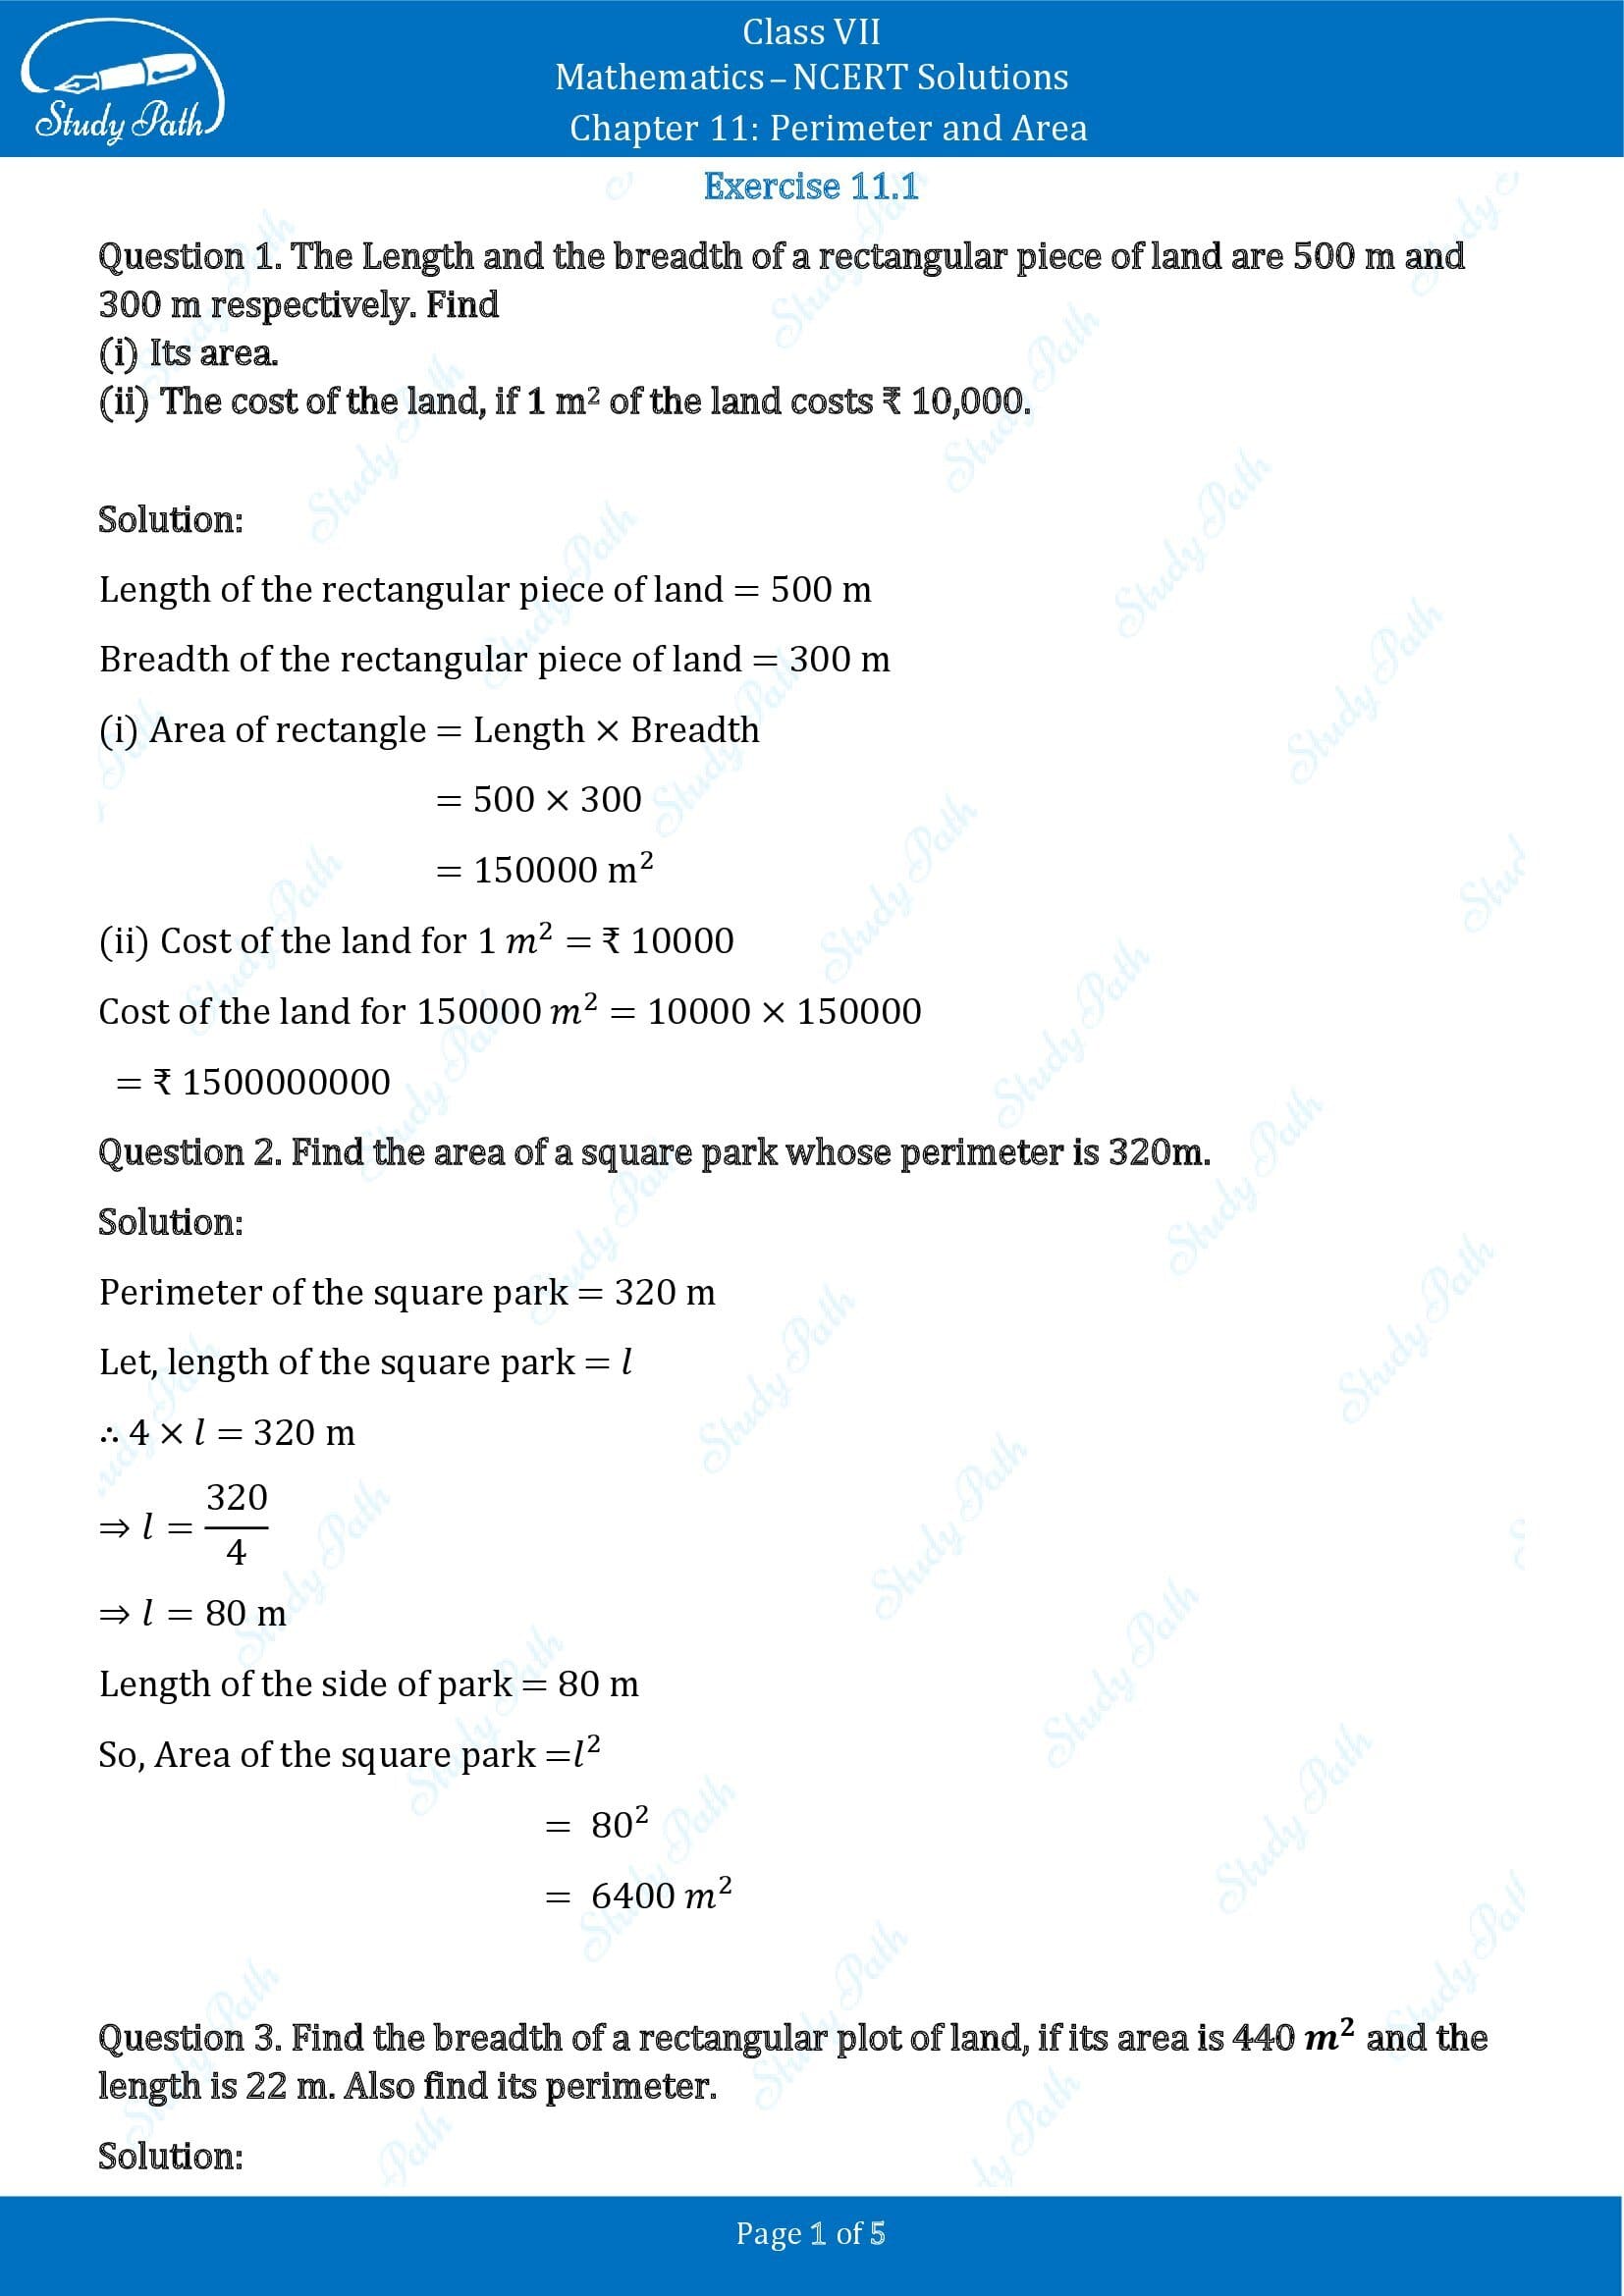 NCERT Solutions for Class 7 Maths Chapter 11 Perimeter and Area Exercise 11.1 00001